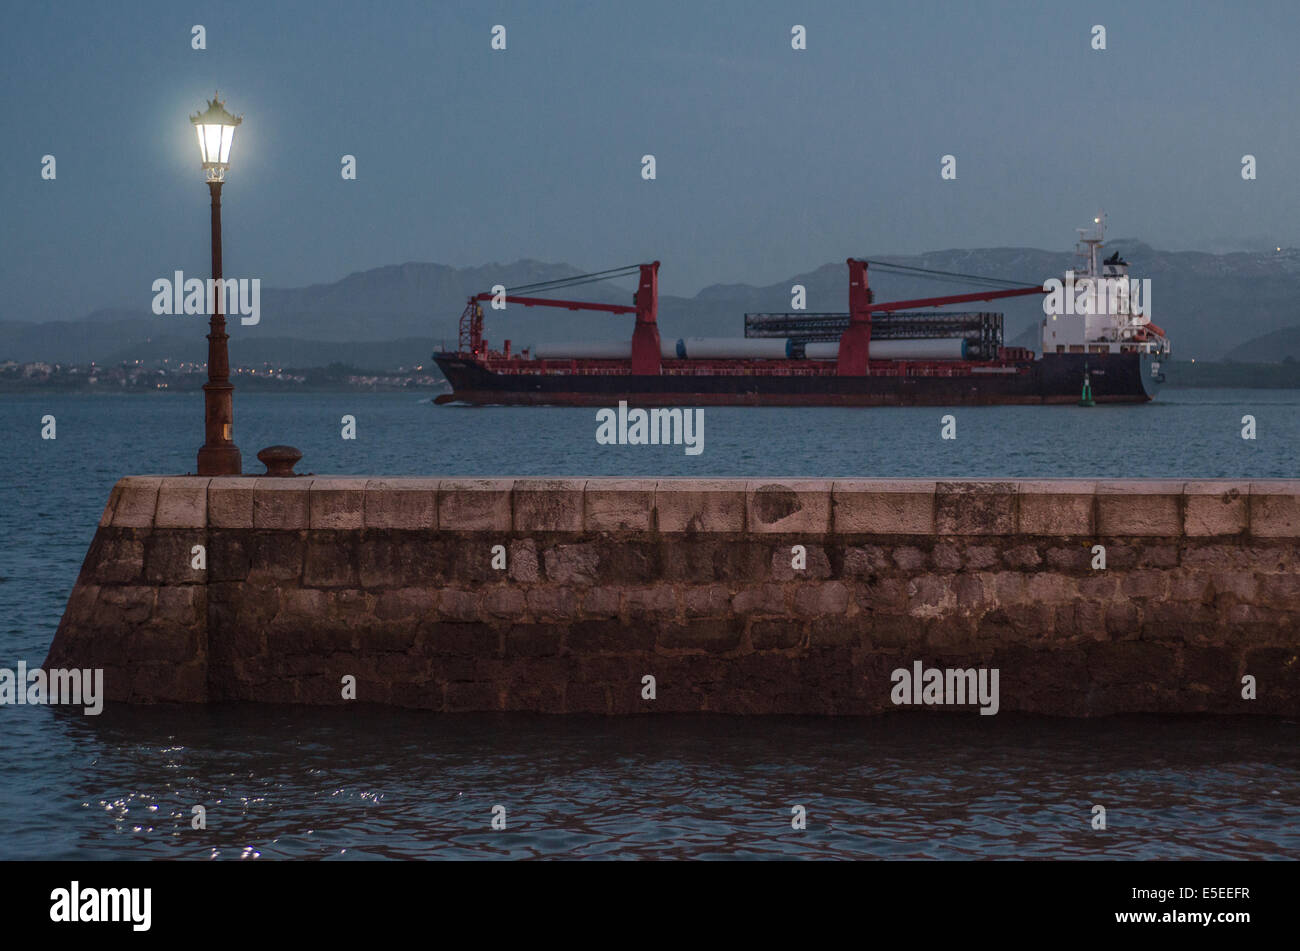 A cargo ship leaves Santander harbour in the evening. It will sail a short distance across Santander bay before reaching the ope Stock Photo